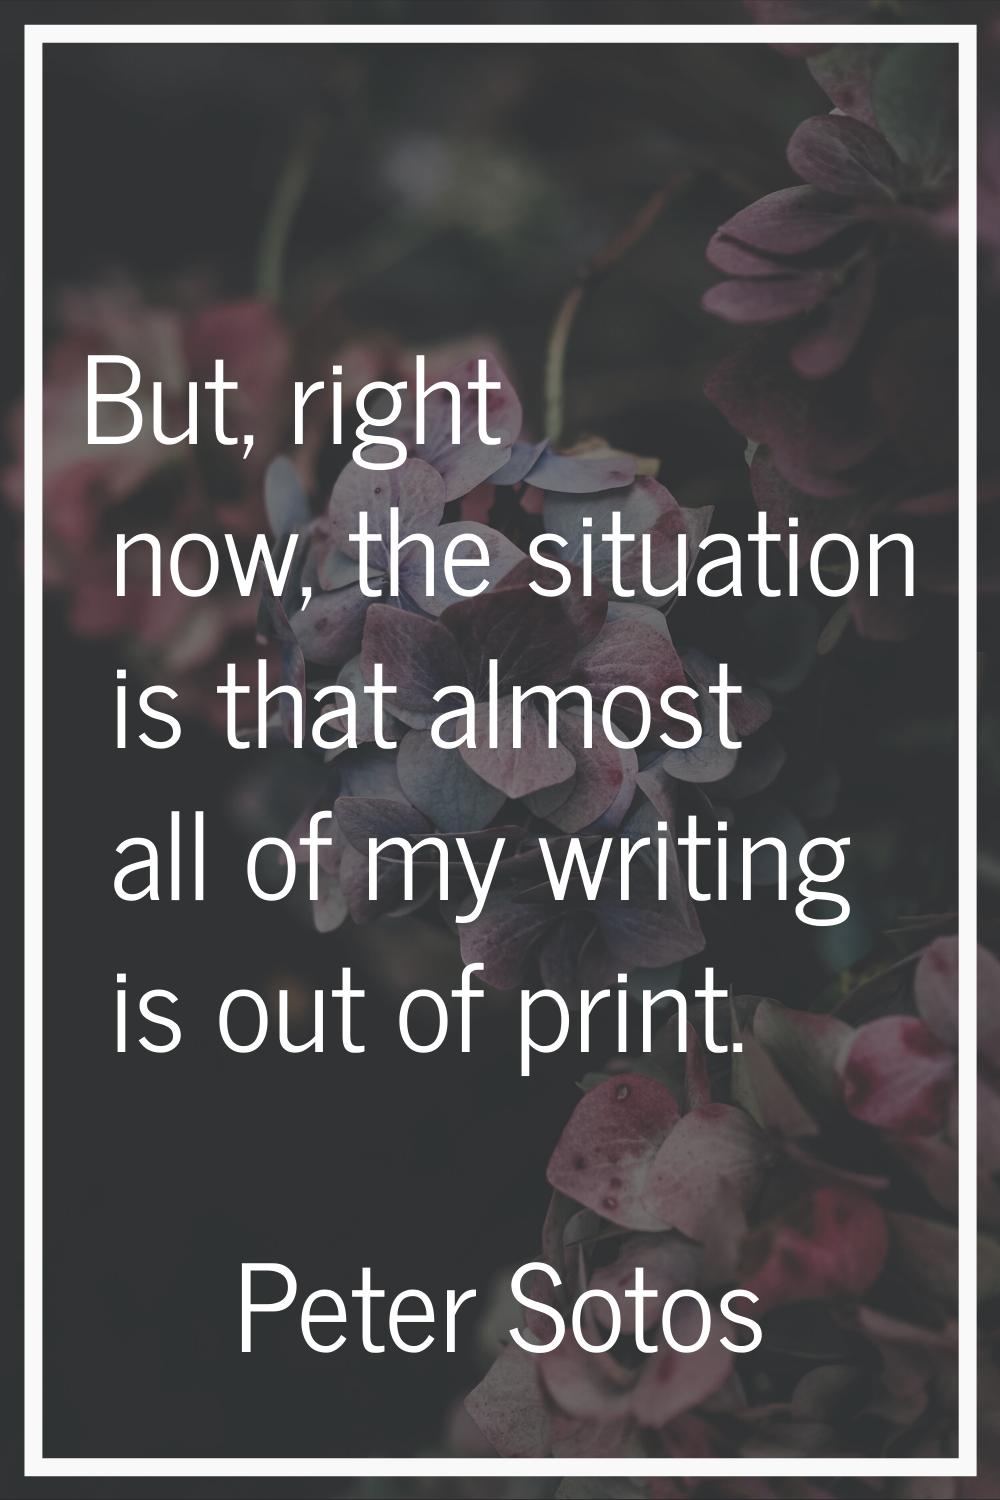 But, right now, the situation is that almost all of my writing is out of print.